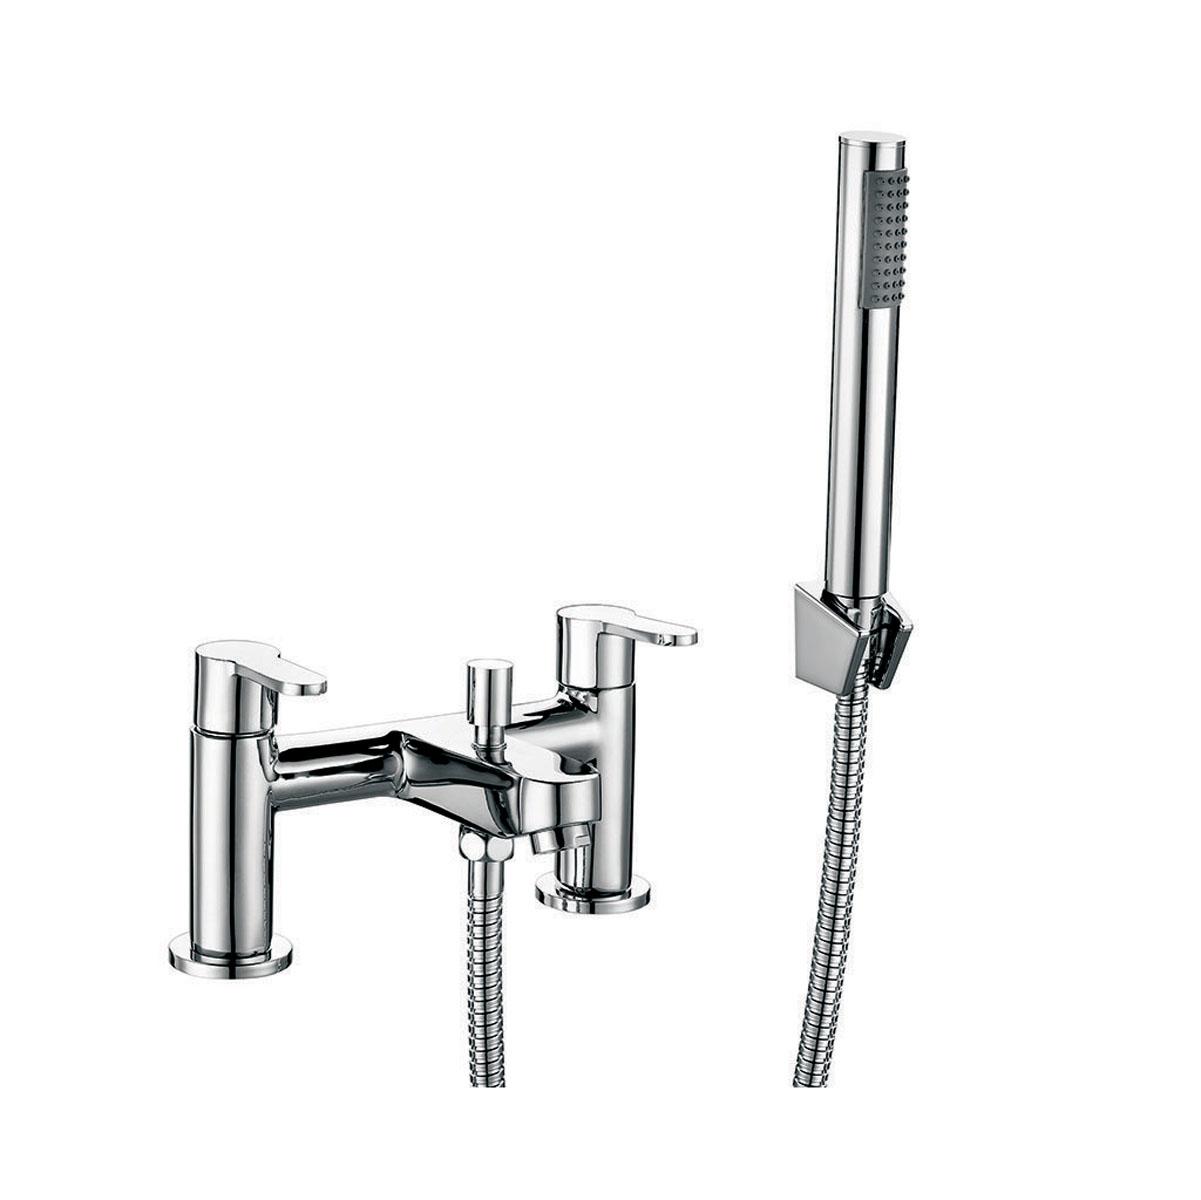 An image of Zico Bath Shower Mixer Pillar Mounted With Kit And Wall Bracket - Chrome